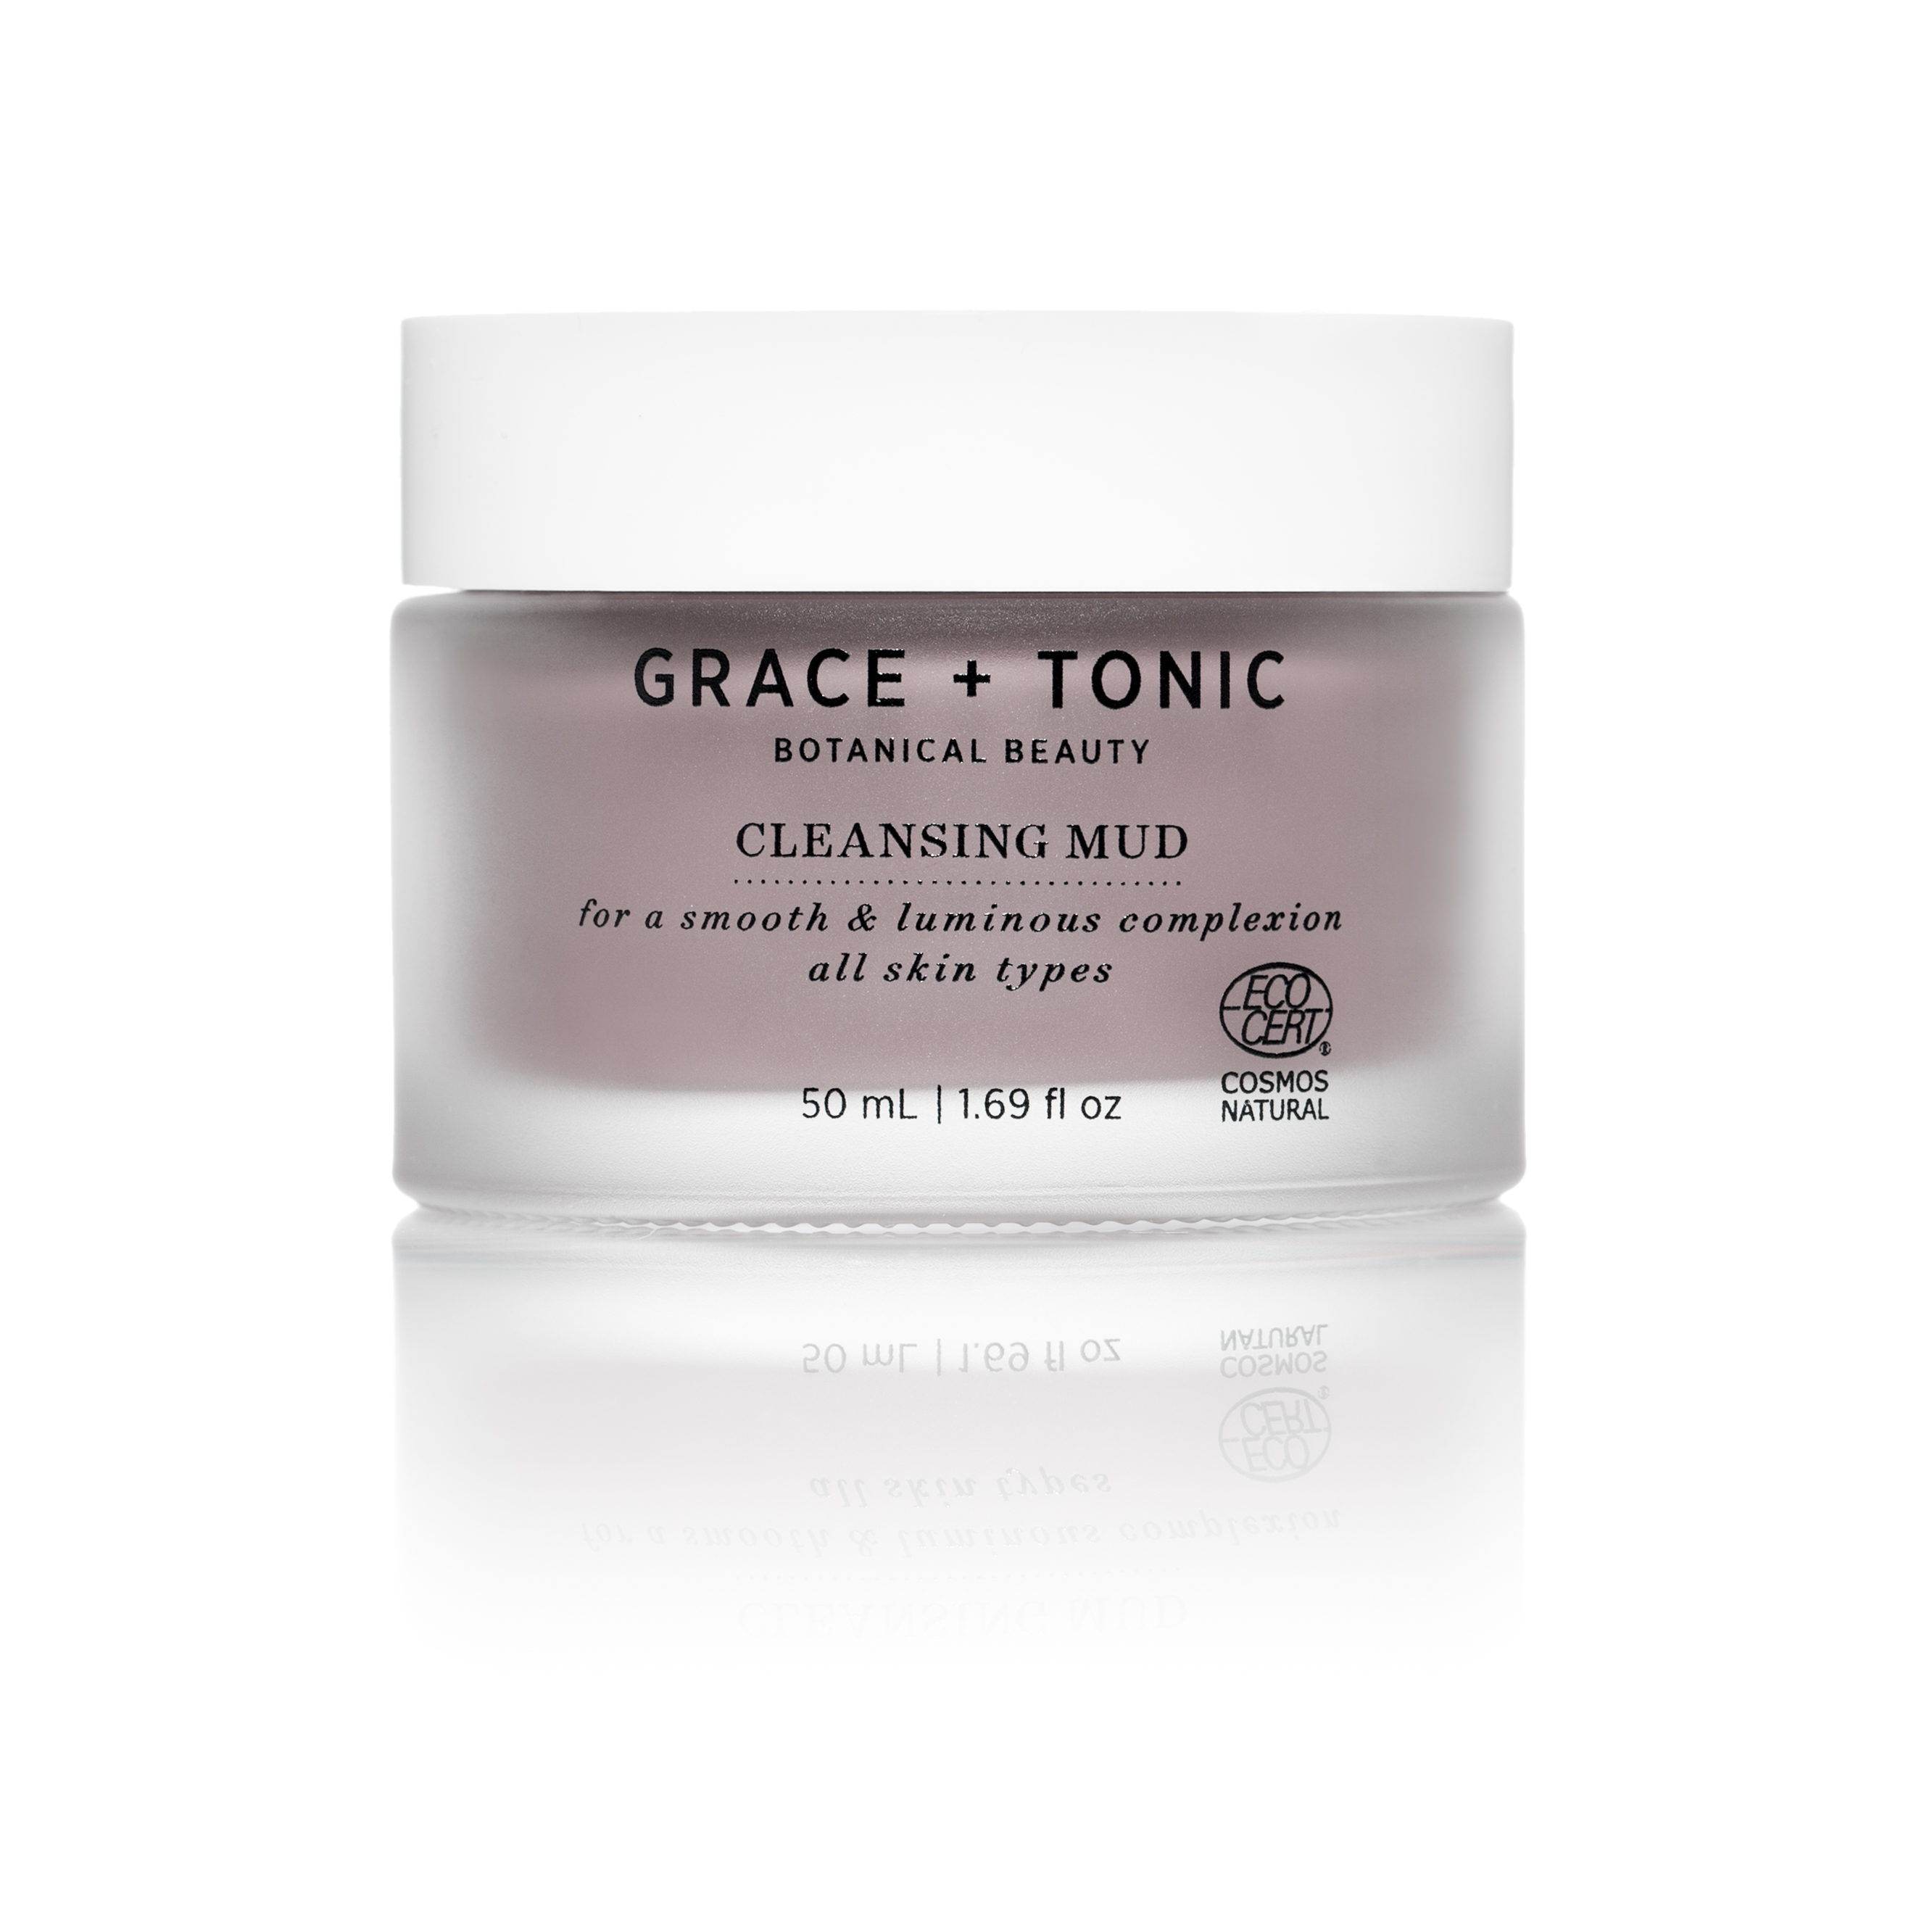 Grace + Tonic Cleansing Mud